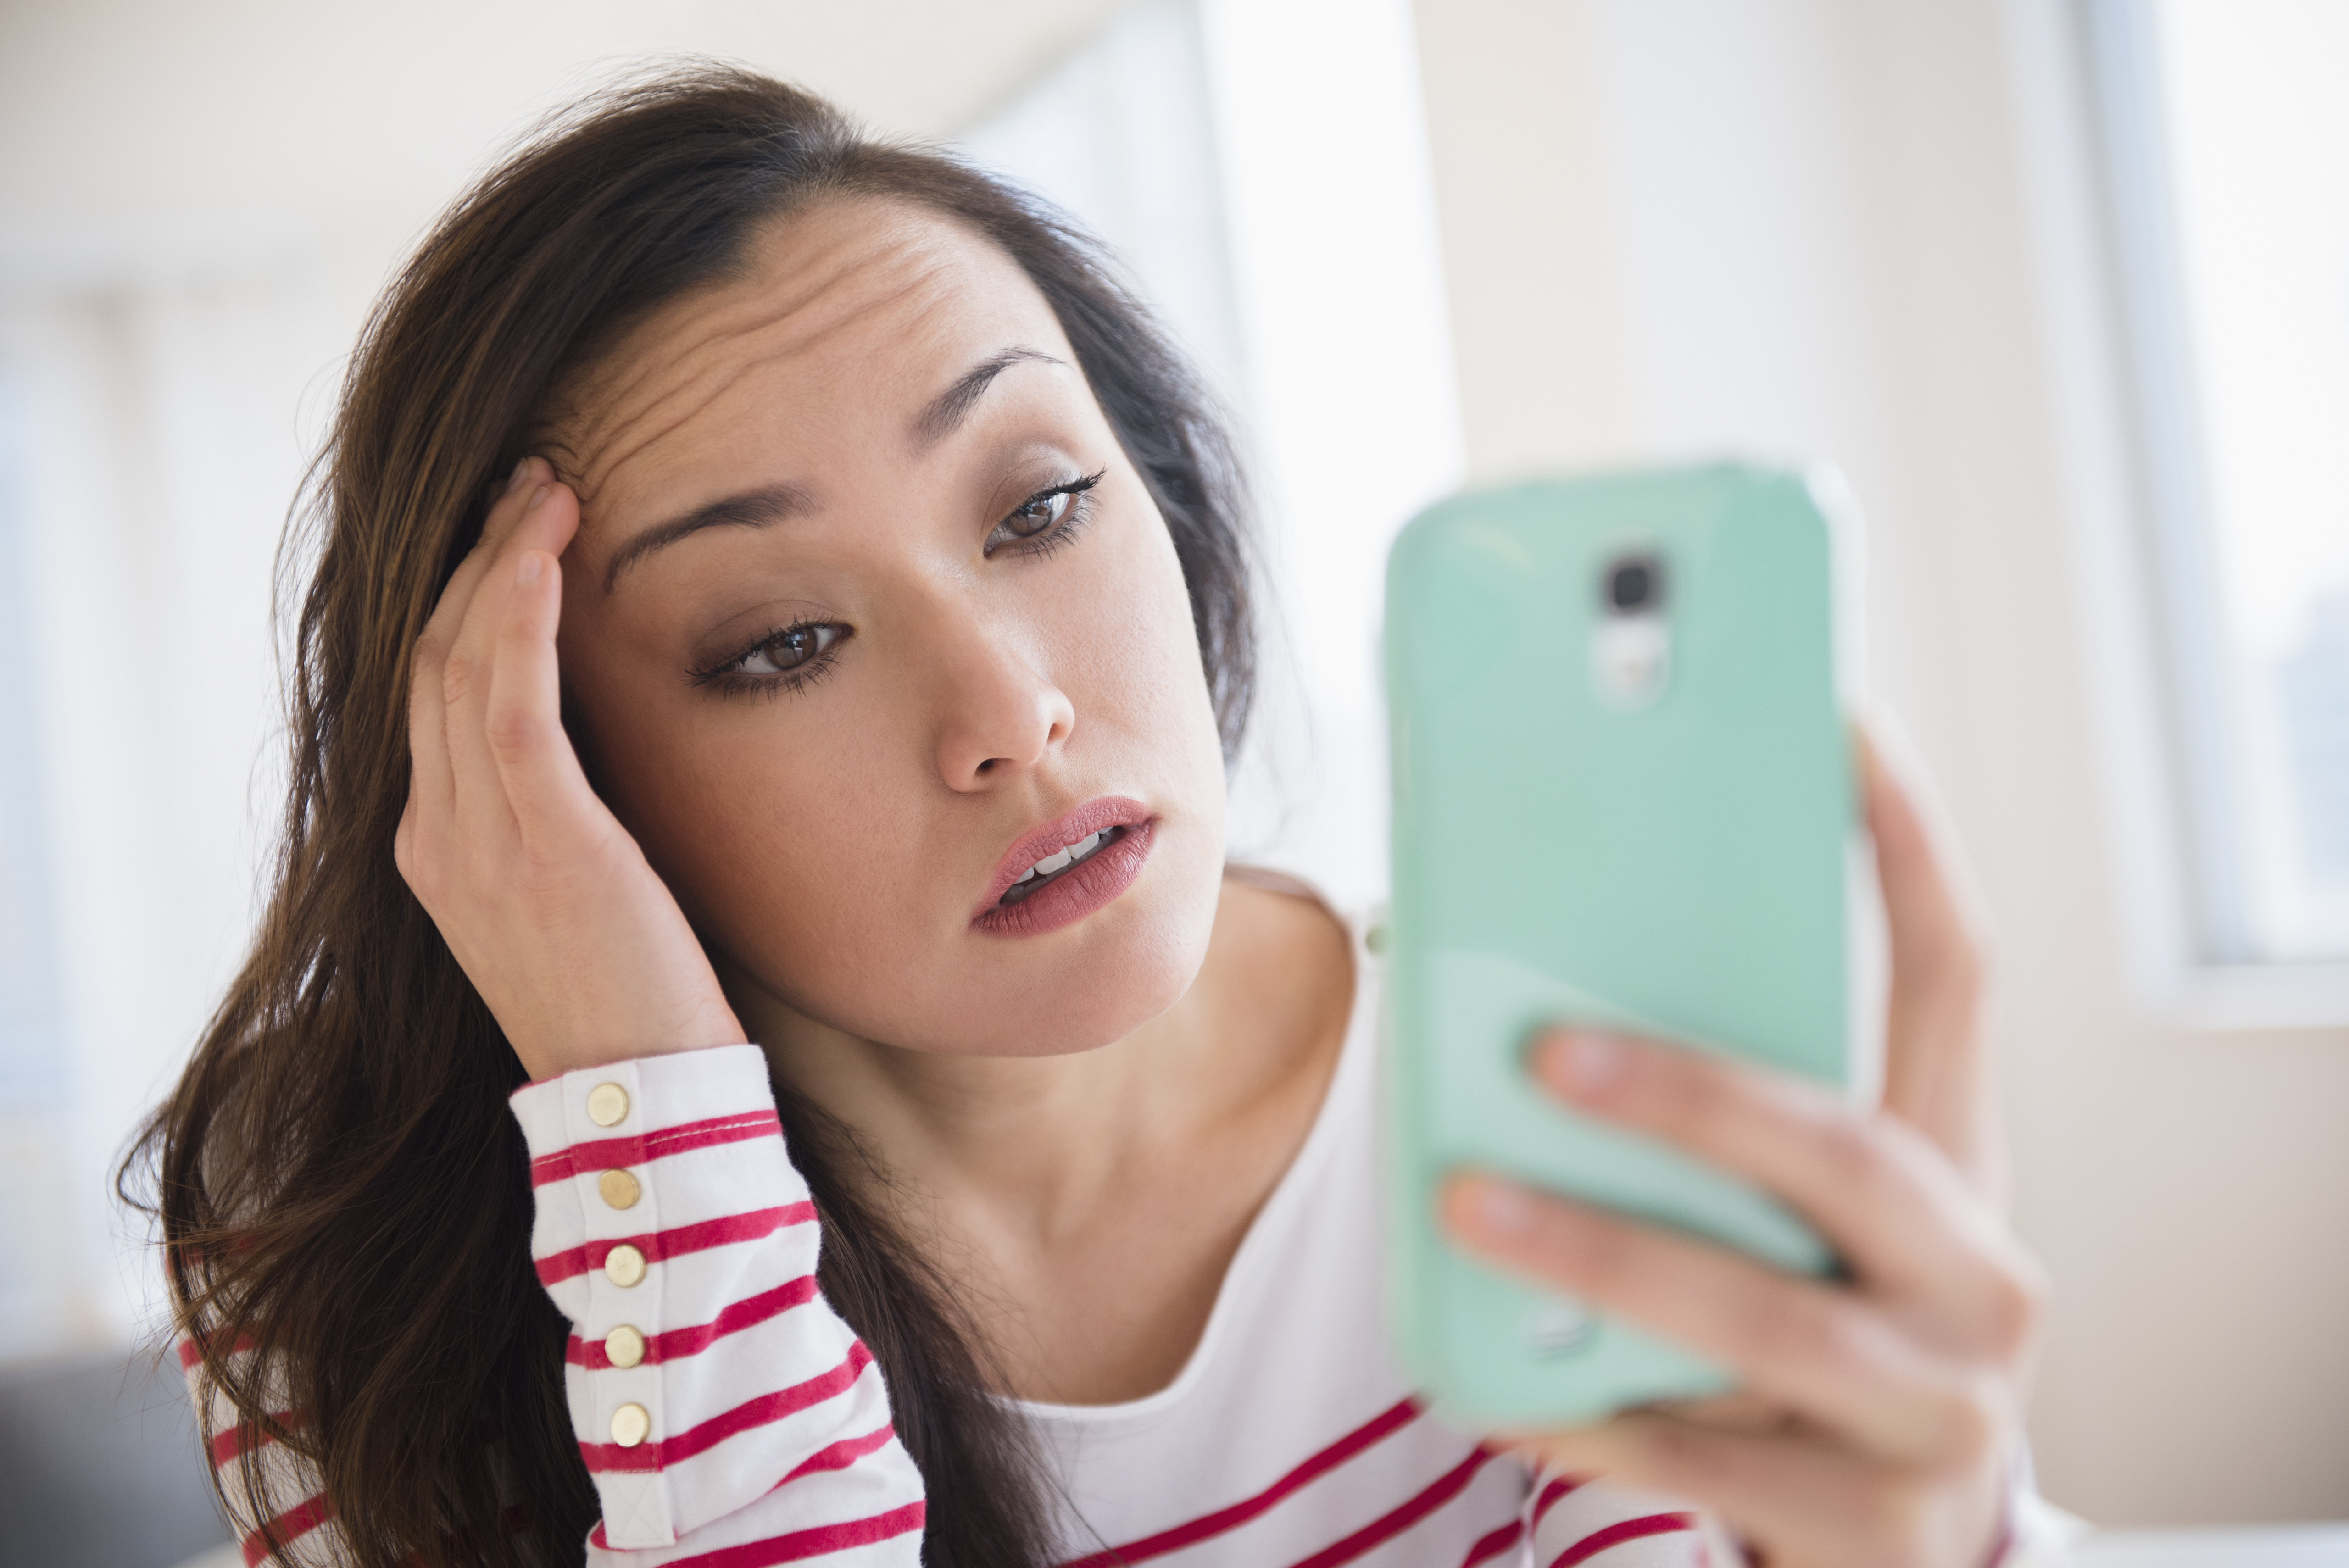 Stressed young woman looking at her phone | Source: Getty Images